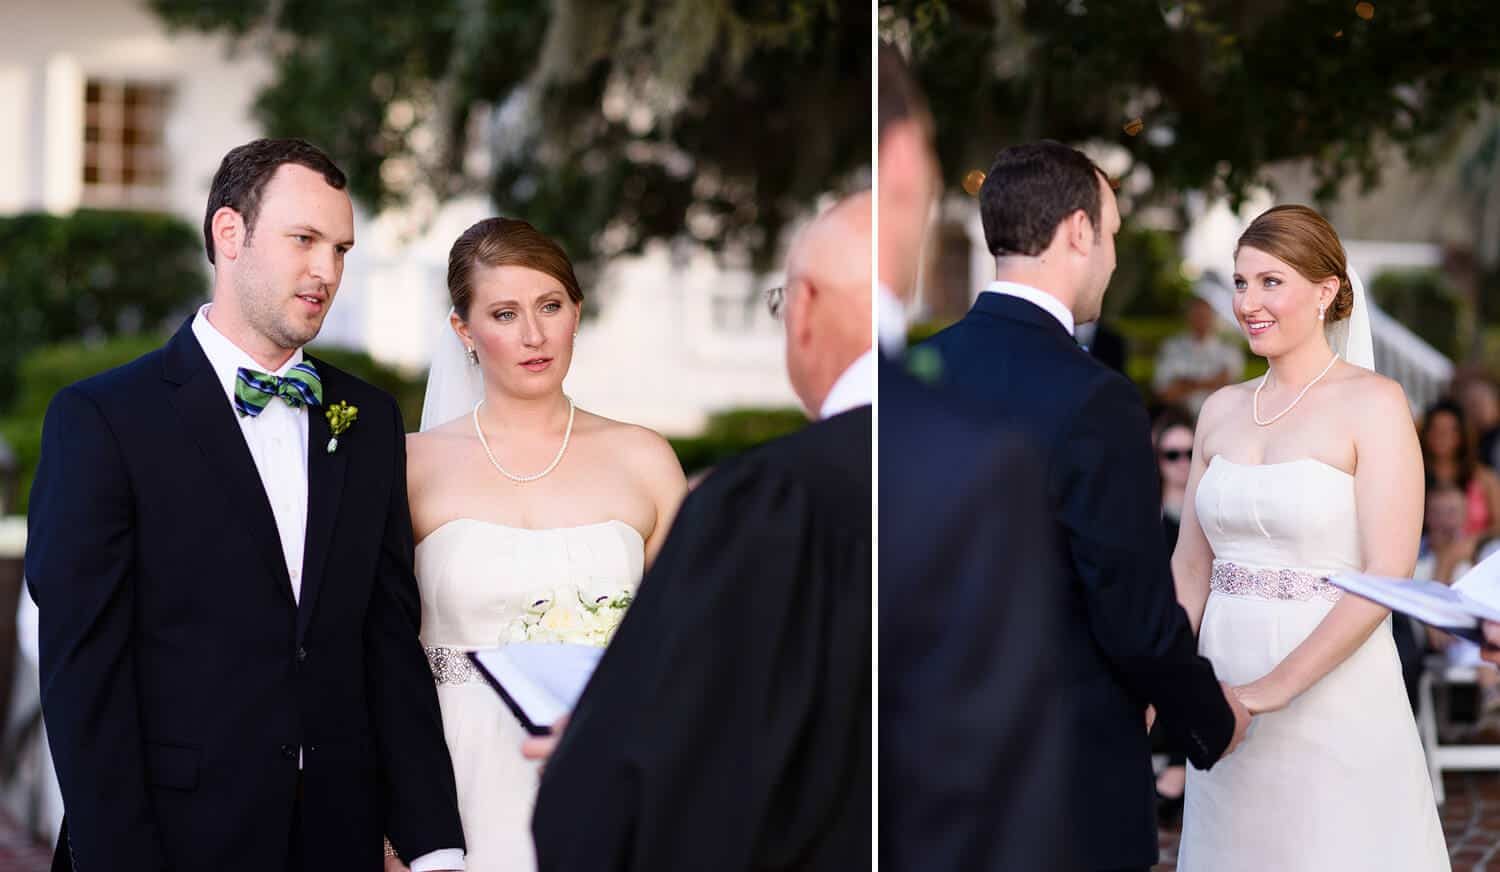 Bride getting emotional during ceremony